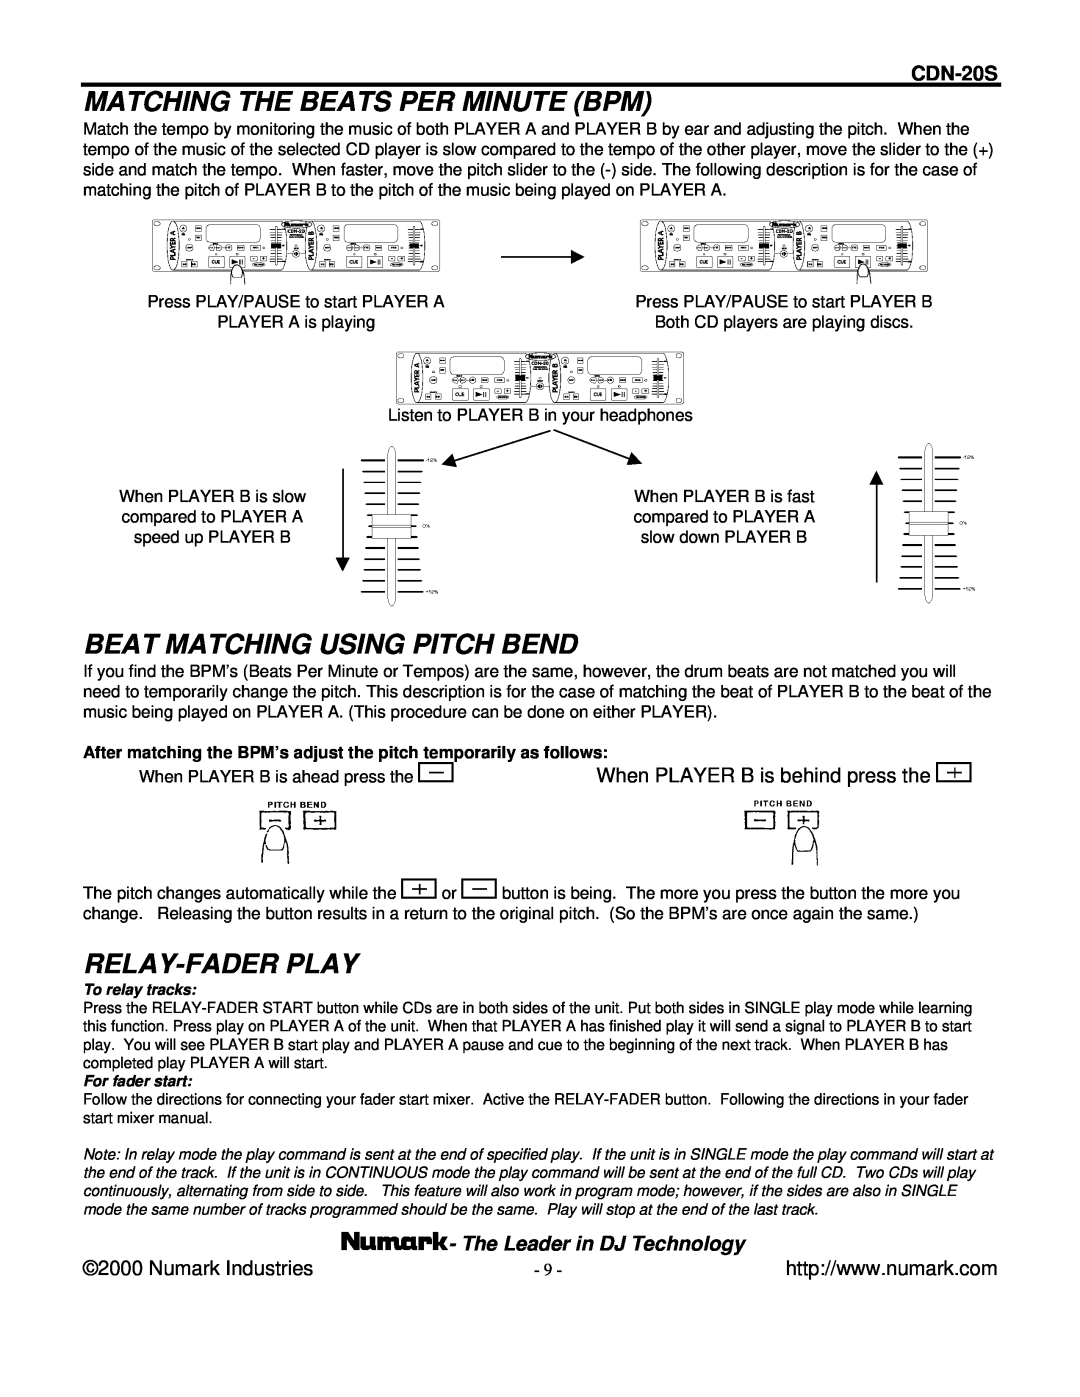 Numark Industries CDN-20S manual Matching The Beats Per Minute Bpm, Beat Matching Using Pitch Bend, Relay-Faderplay 